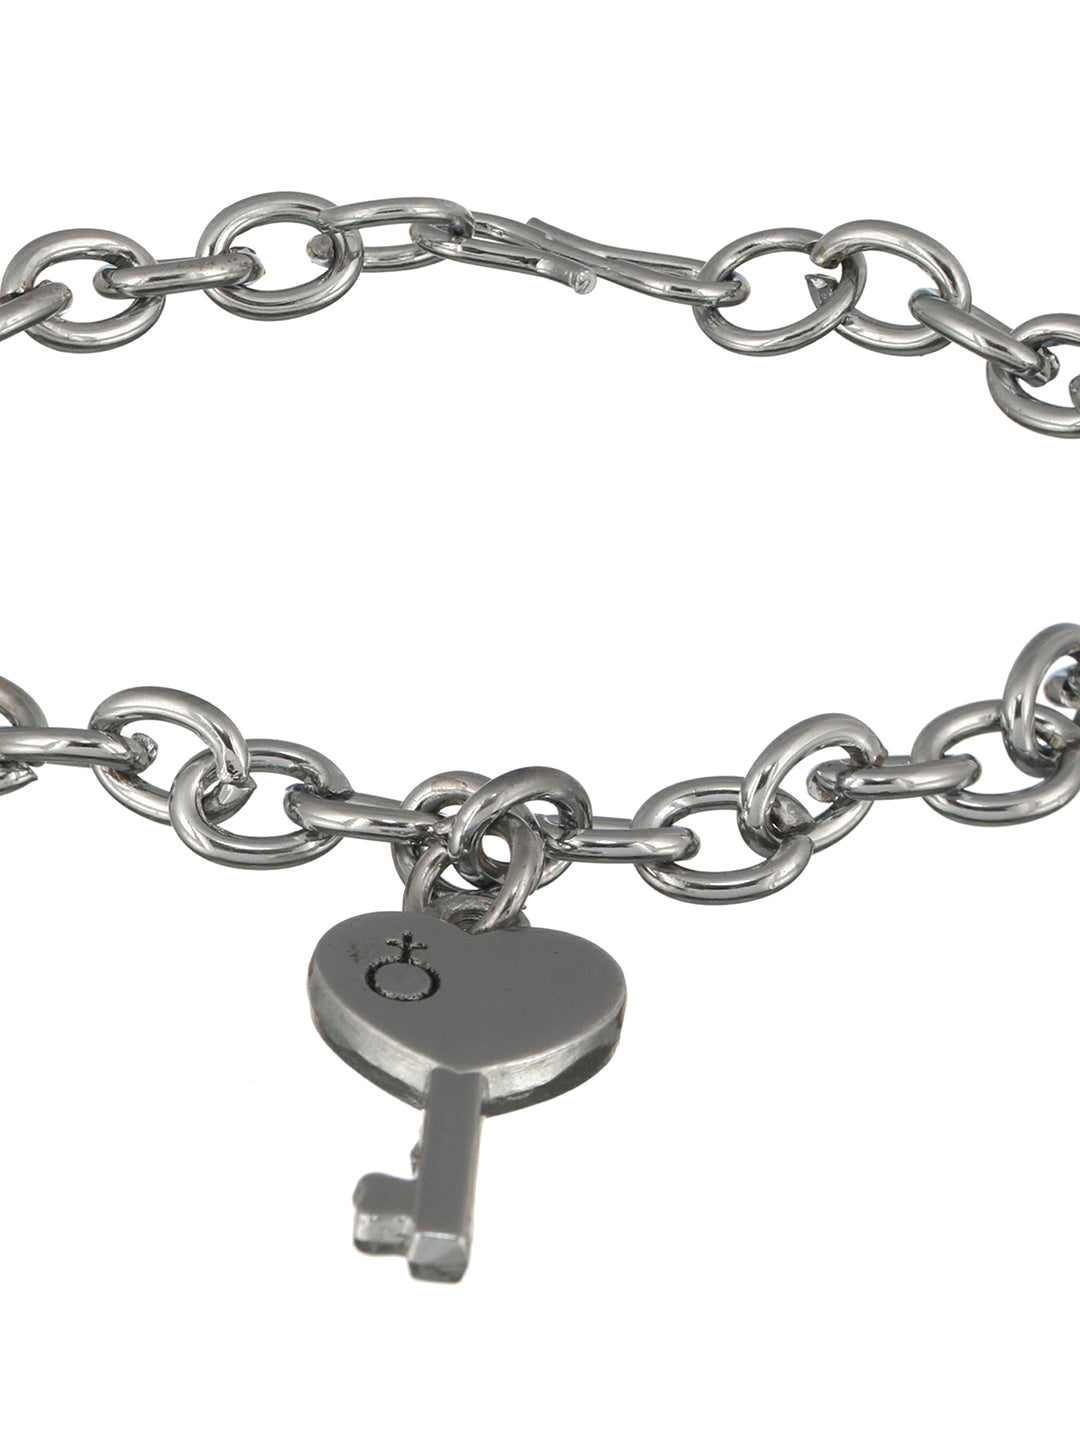 Bold by Priyaasi Key to Heart Lock Silver-Plated Link Chain Couple Bracelets